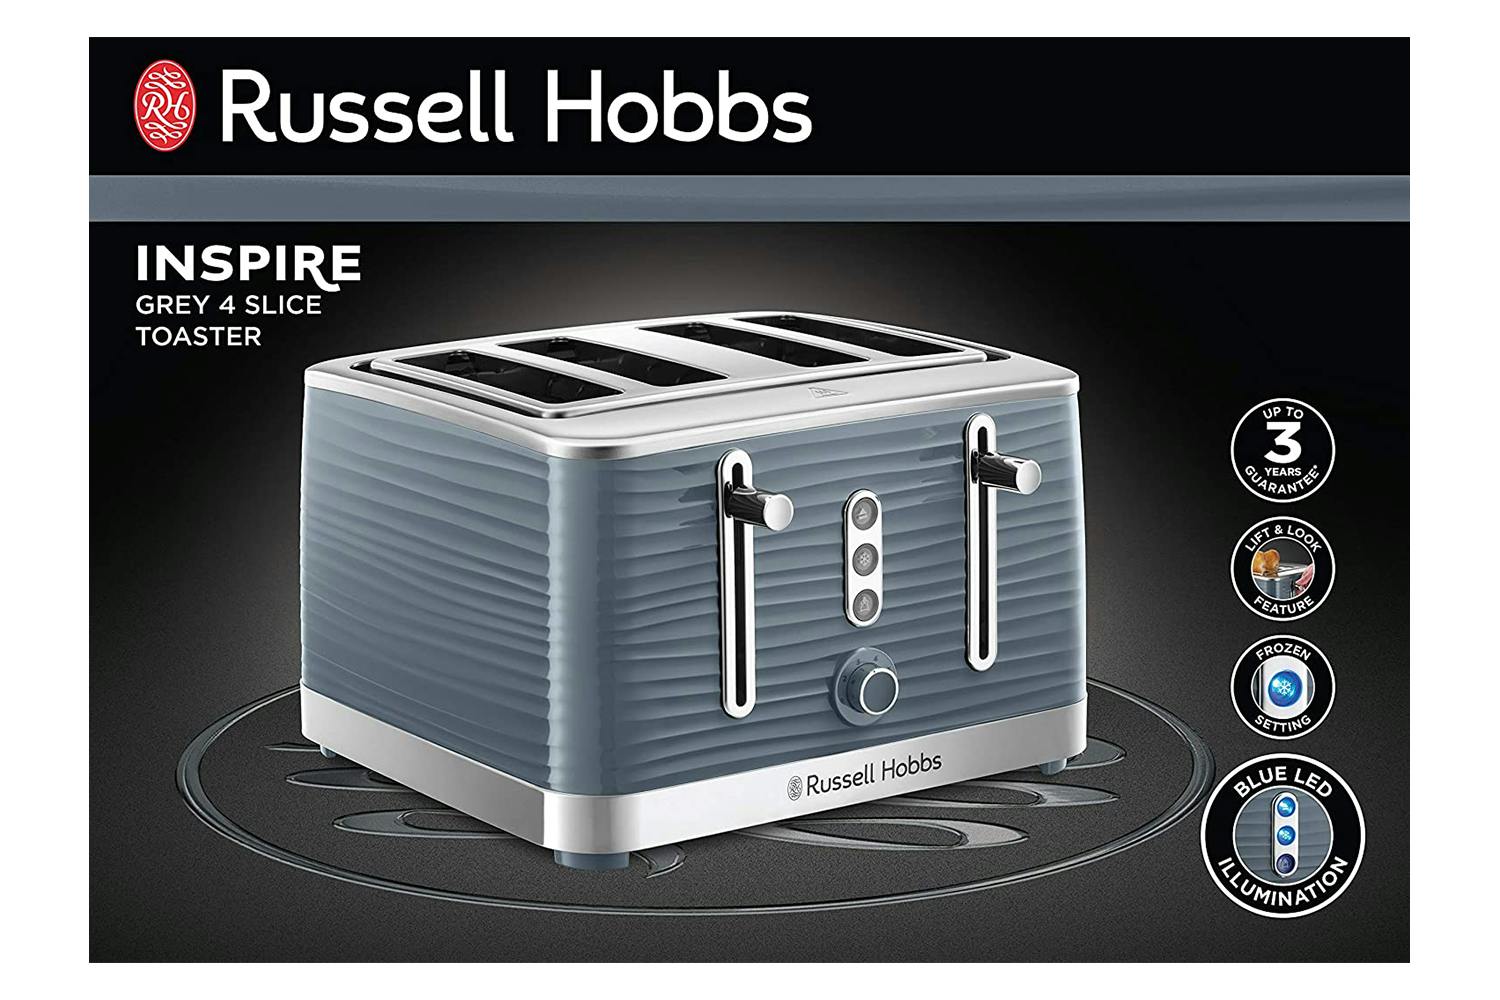 https://hniesfp.imgix.net/8/images/detailed/219/russell_hobbs_toaster_24383_4.jpg?fit=fill&bg=0FFF&w=1500&h=1000&auto=format,compress